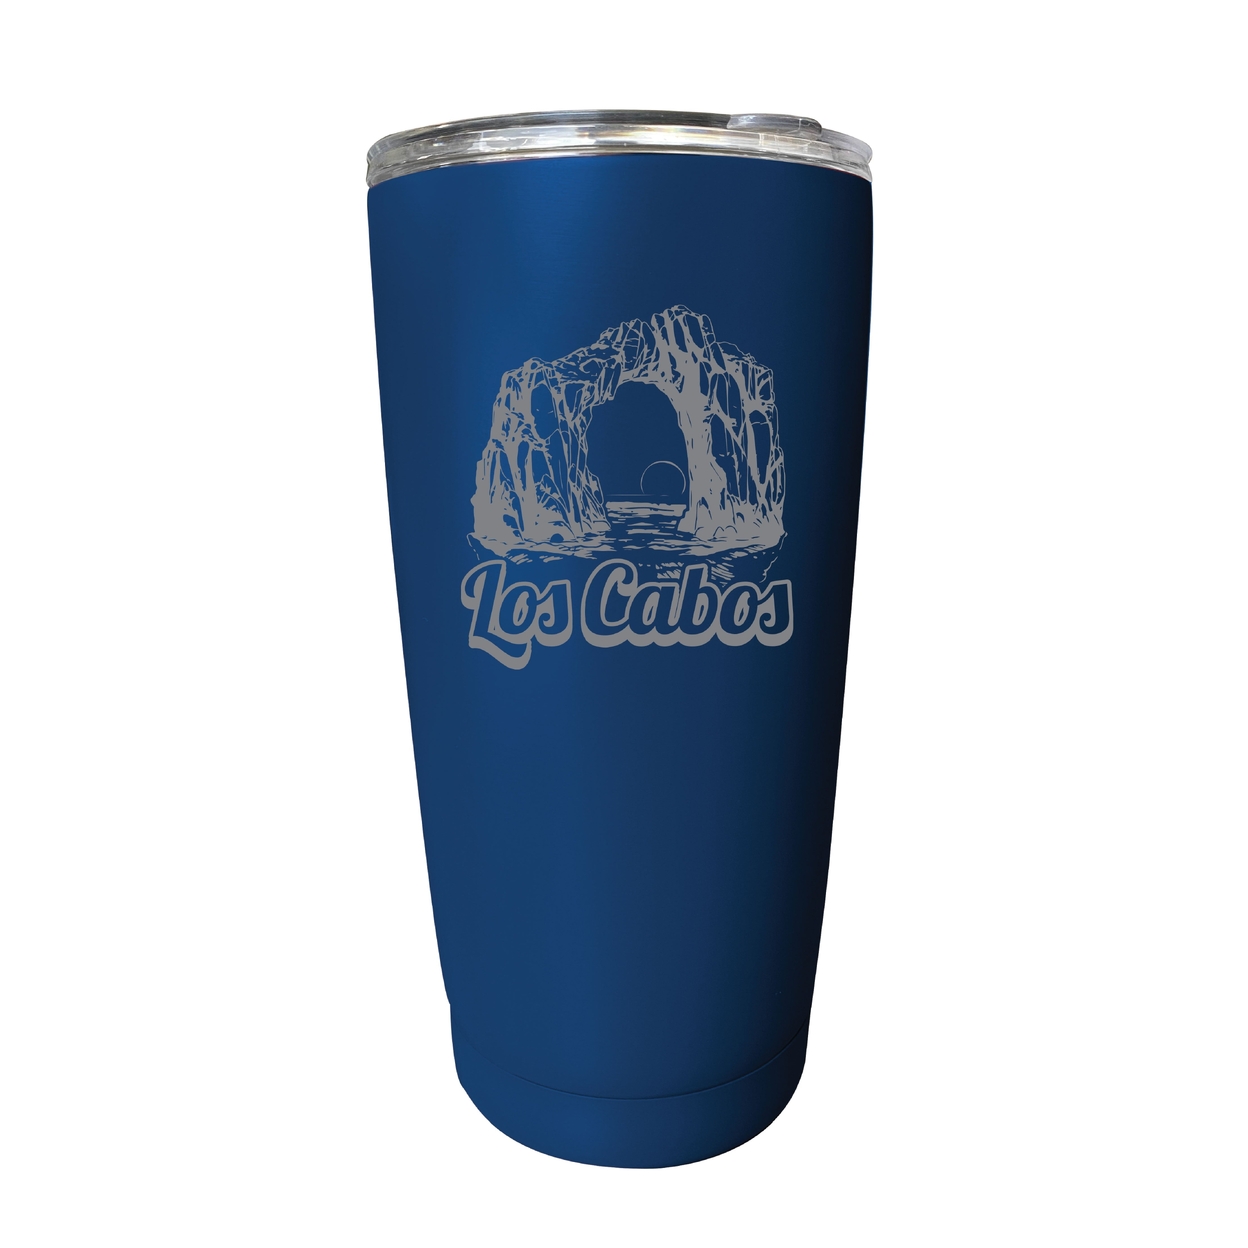 Los Cabos Mexico Souvenir 16 Oz Engraved Stainless Steel Insulated Tumbler - Navy,,4-Pack